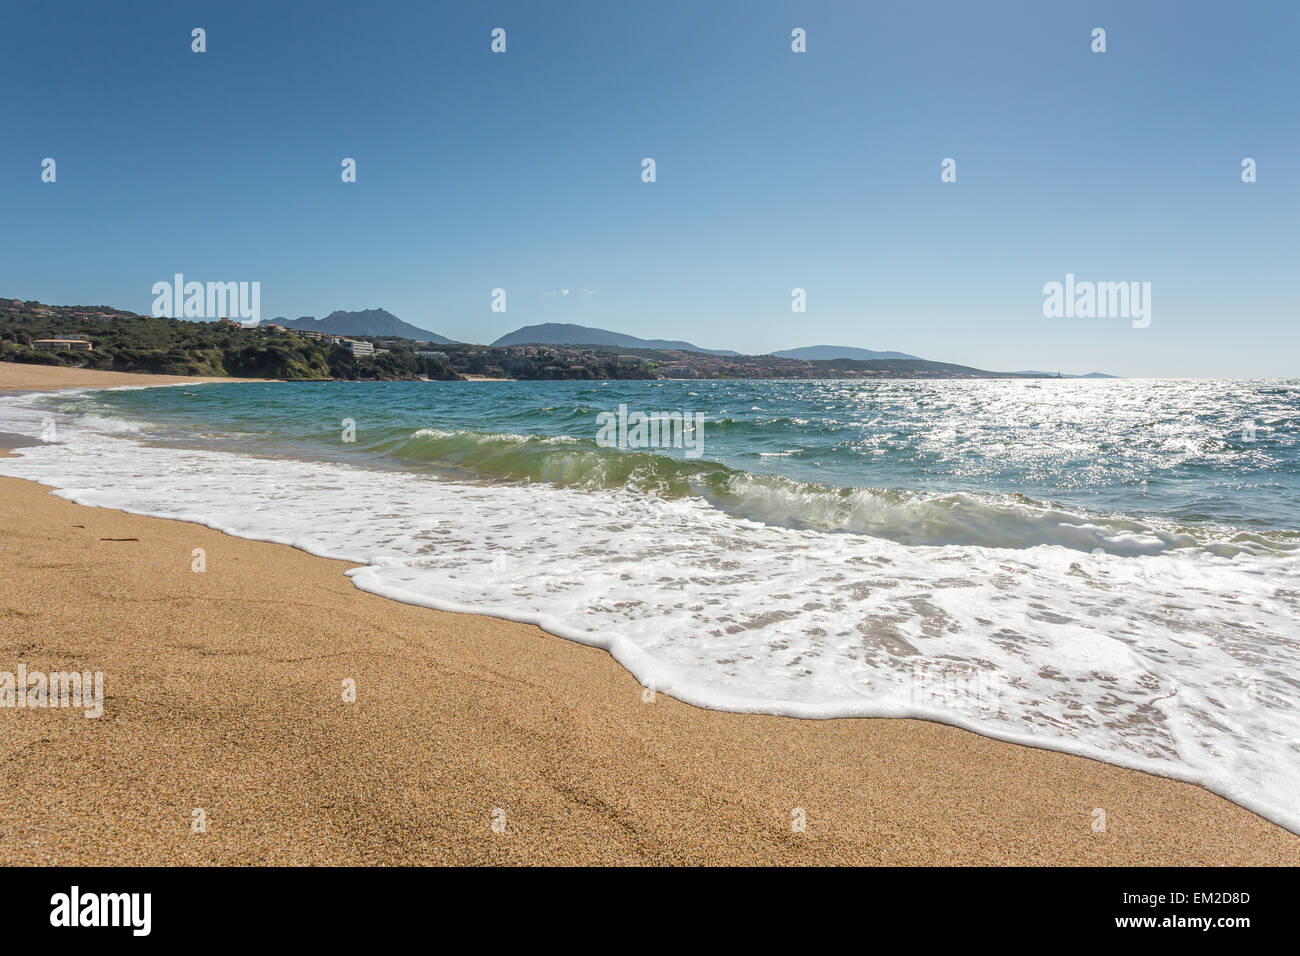 Waves gently lapping onto the beach at Propriano with golden sand, blue sea and blue sky and hills in the background Stock Photo